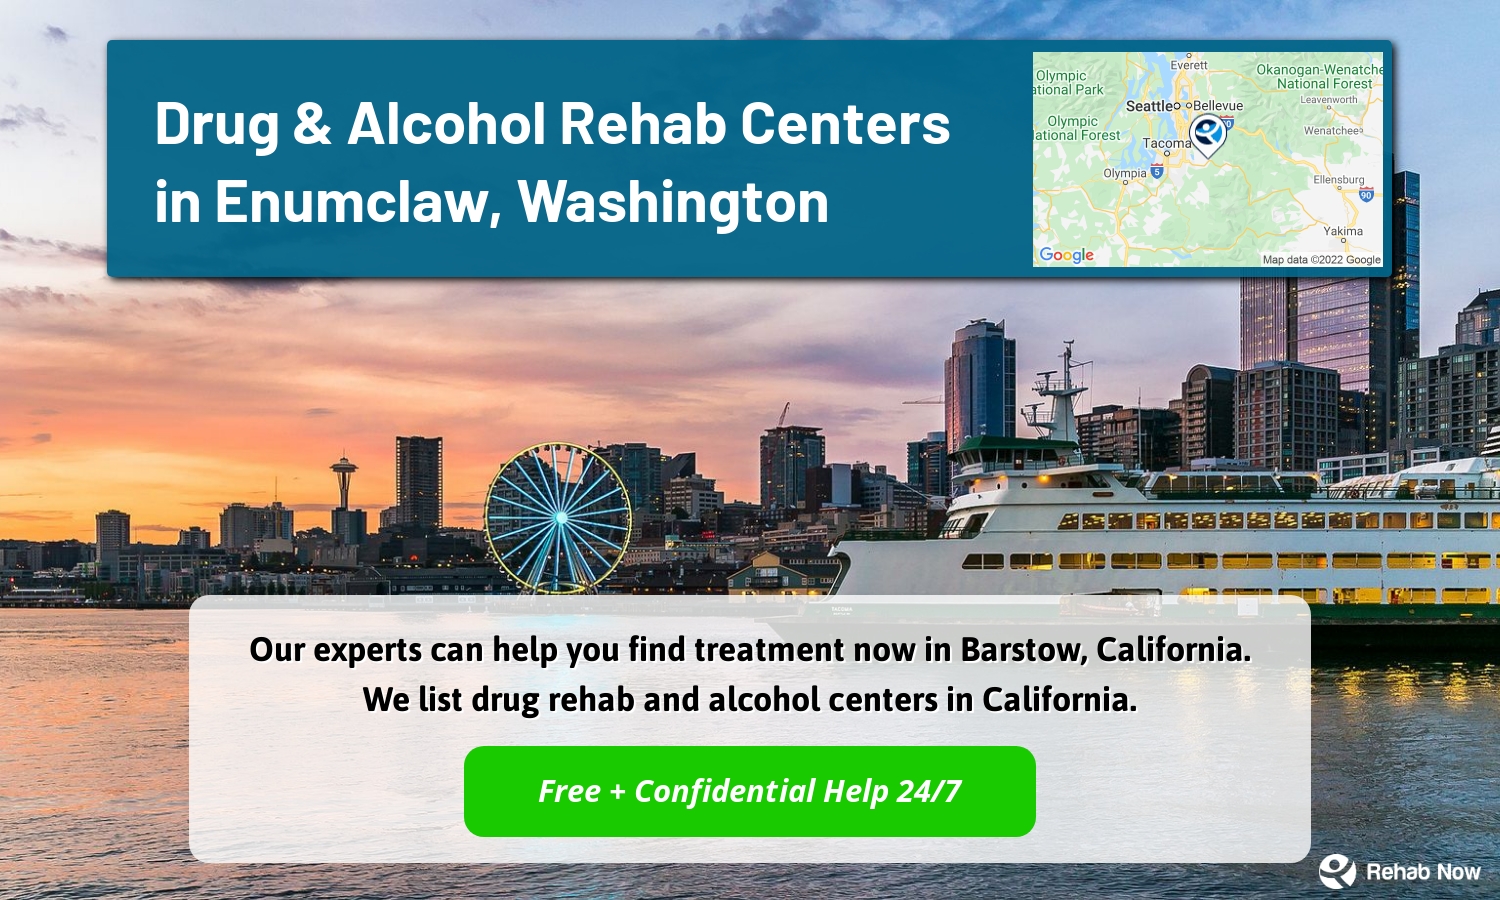 Our experts can help you find treatment now in Barstow, California. We list drug rehab and alcohol centers in California.